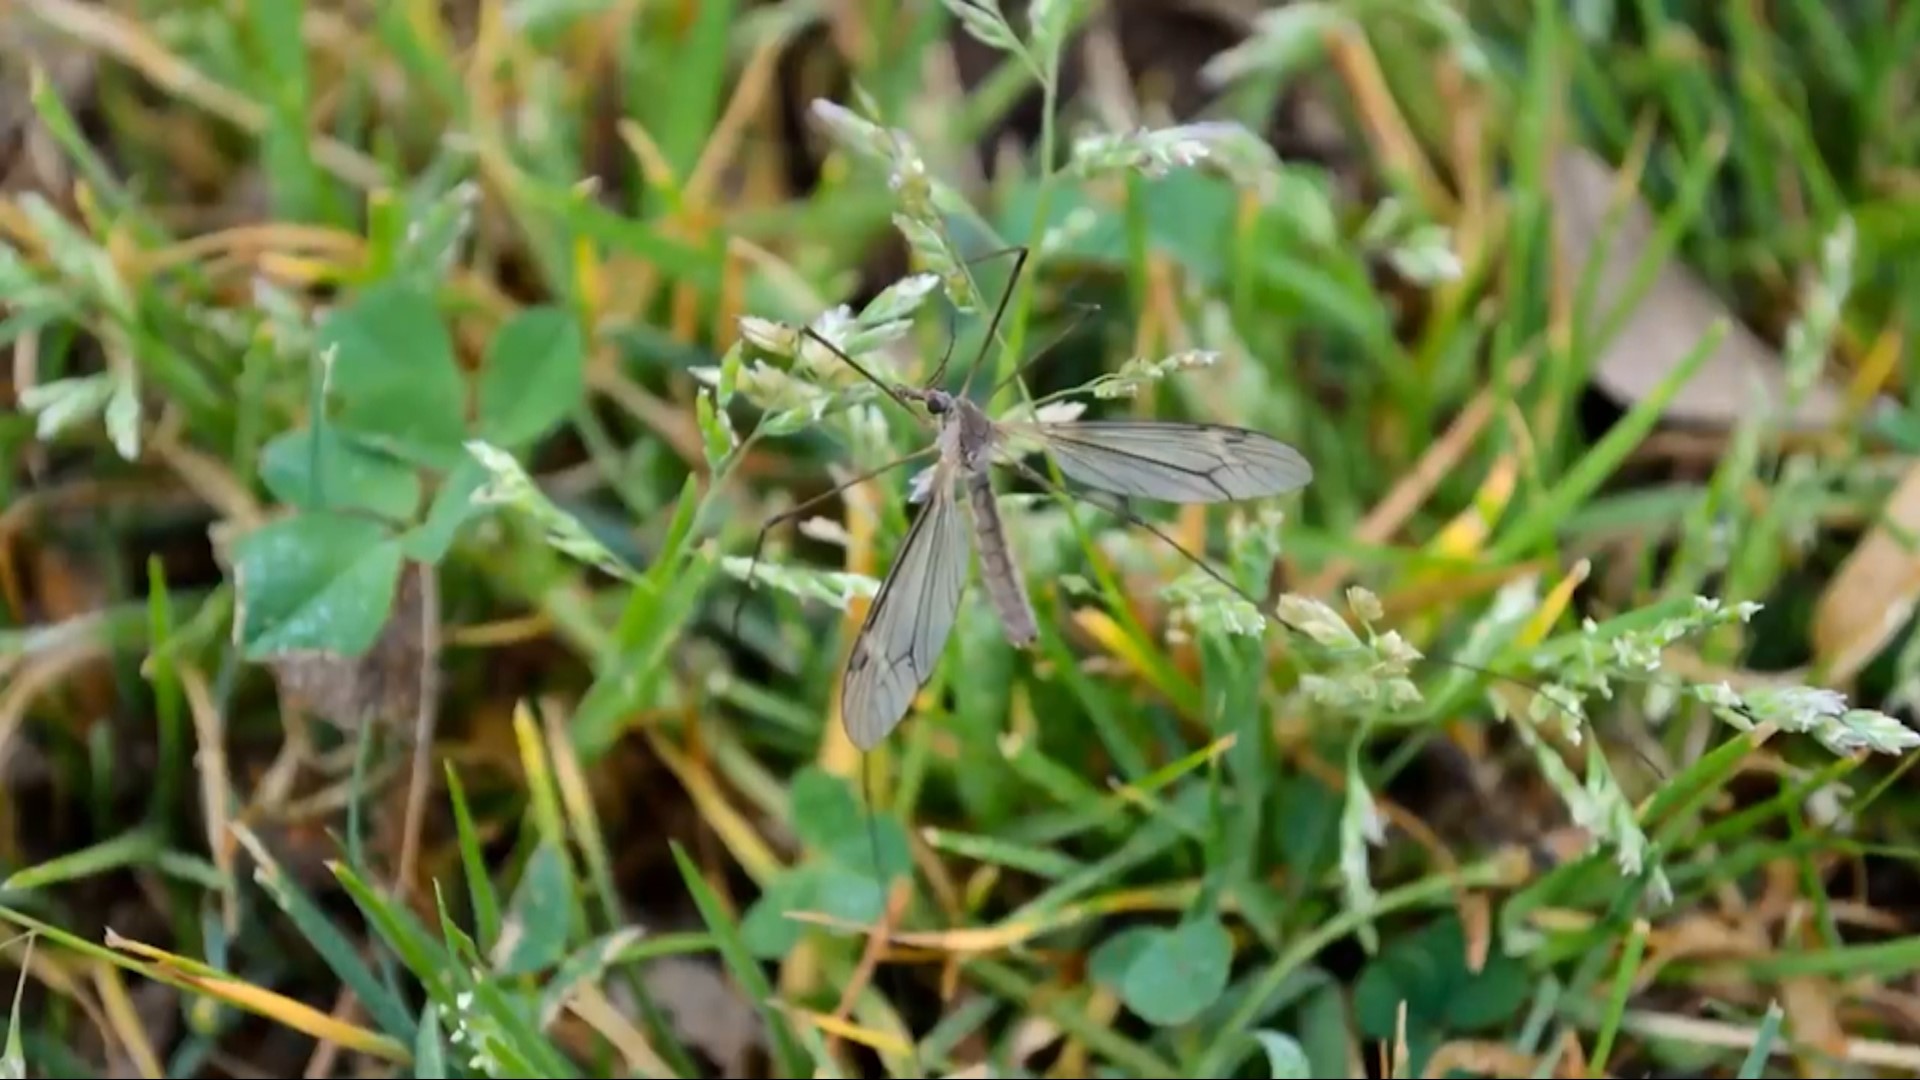 With the start of springtime, crane flies become more apparent in West Texas. However, a common misconception is that they pose a threat like a mosquito.